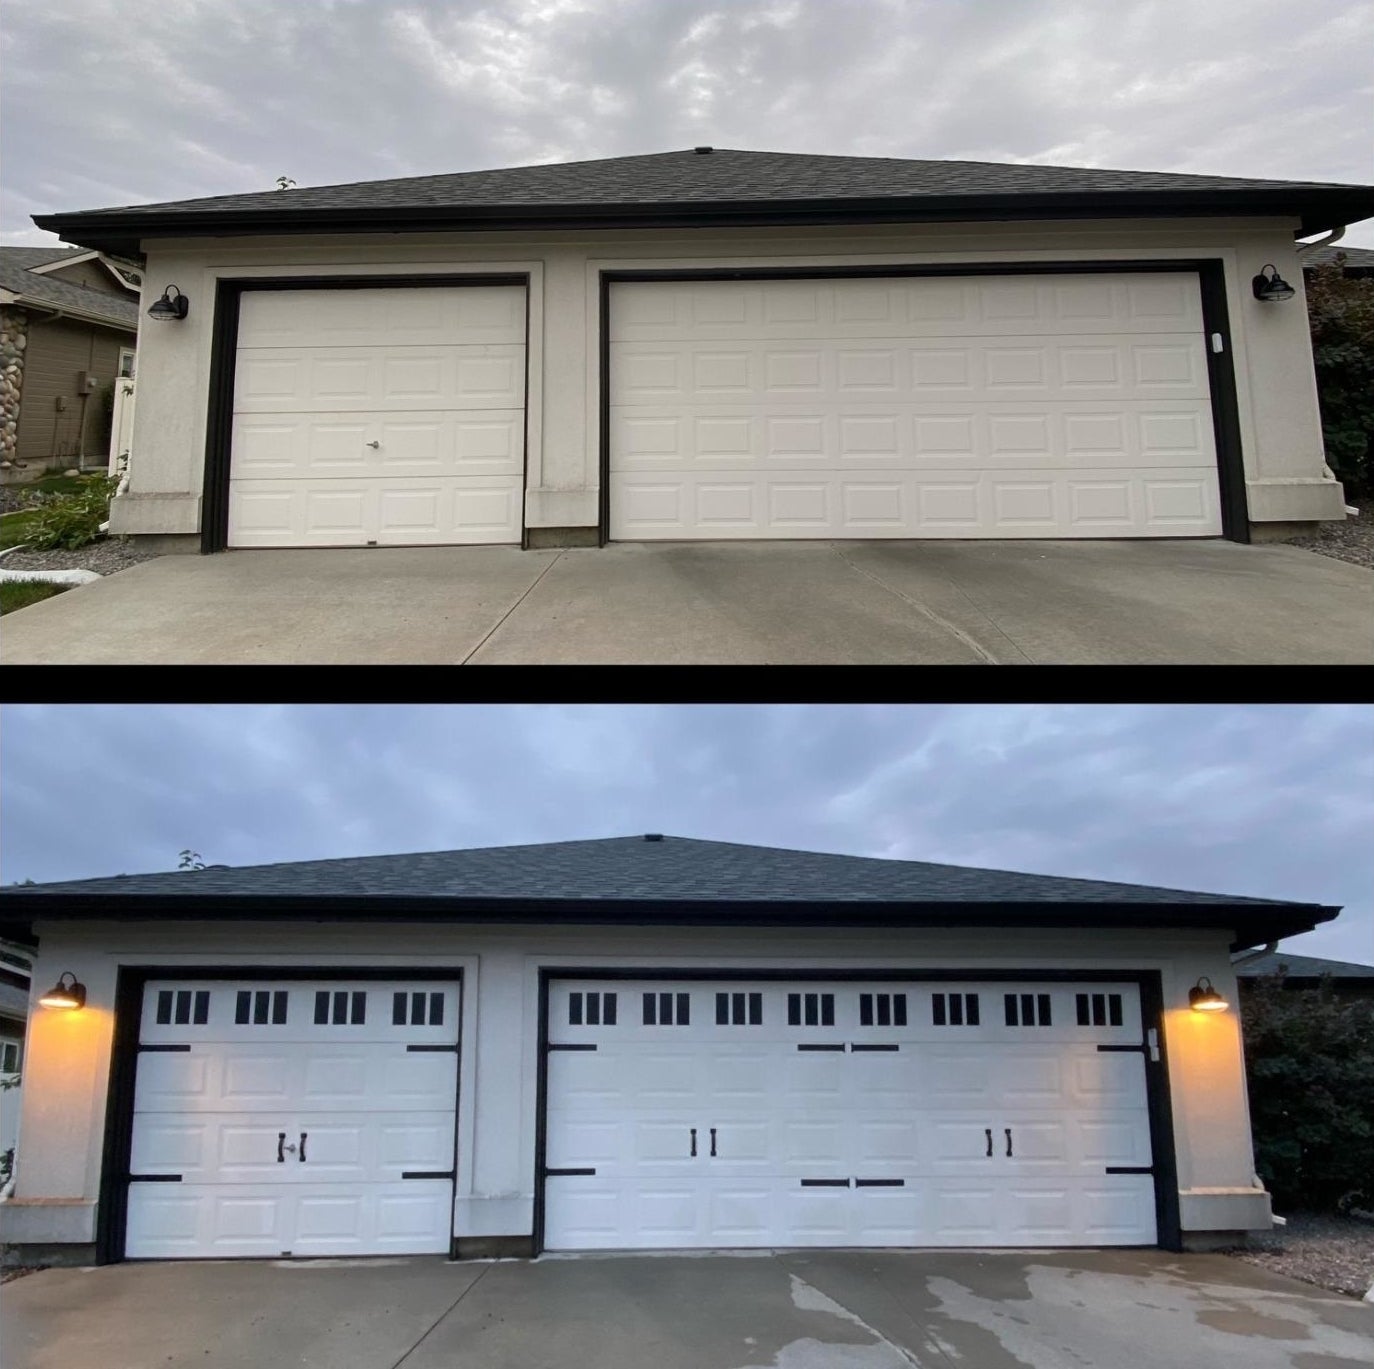 before/after of reviewer&#x27;s garage with the magnets added to make it look like a new garage door